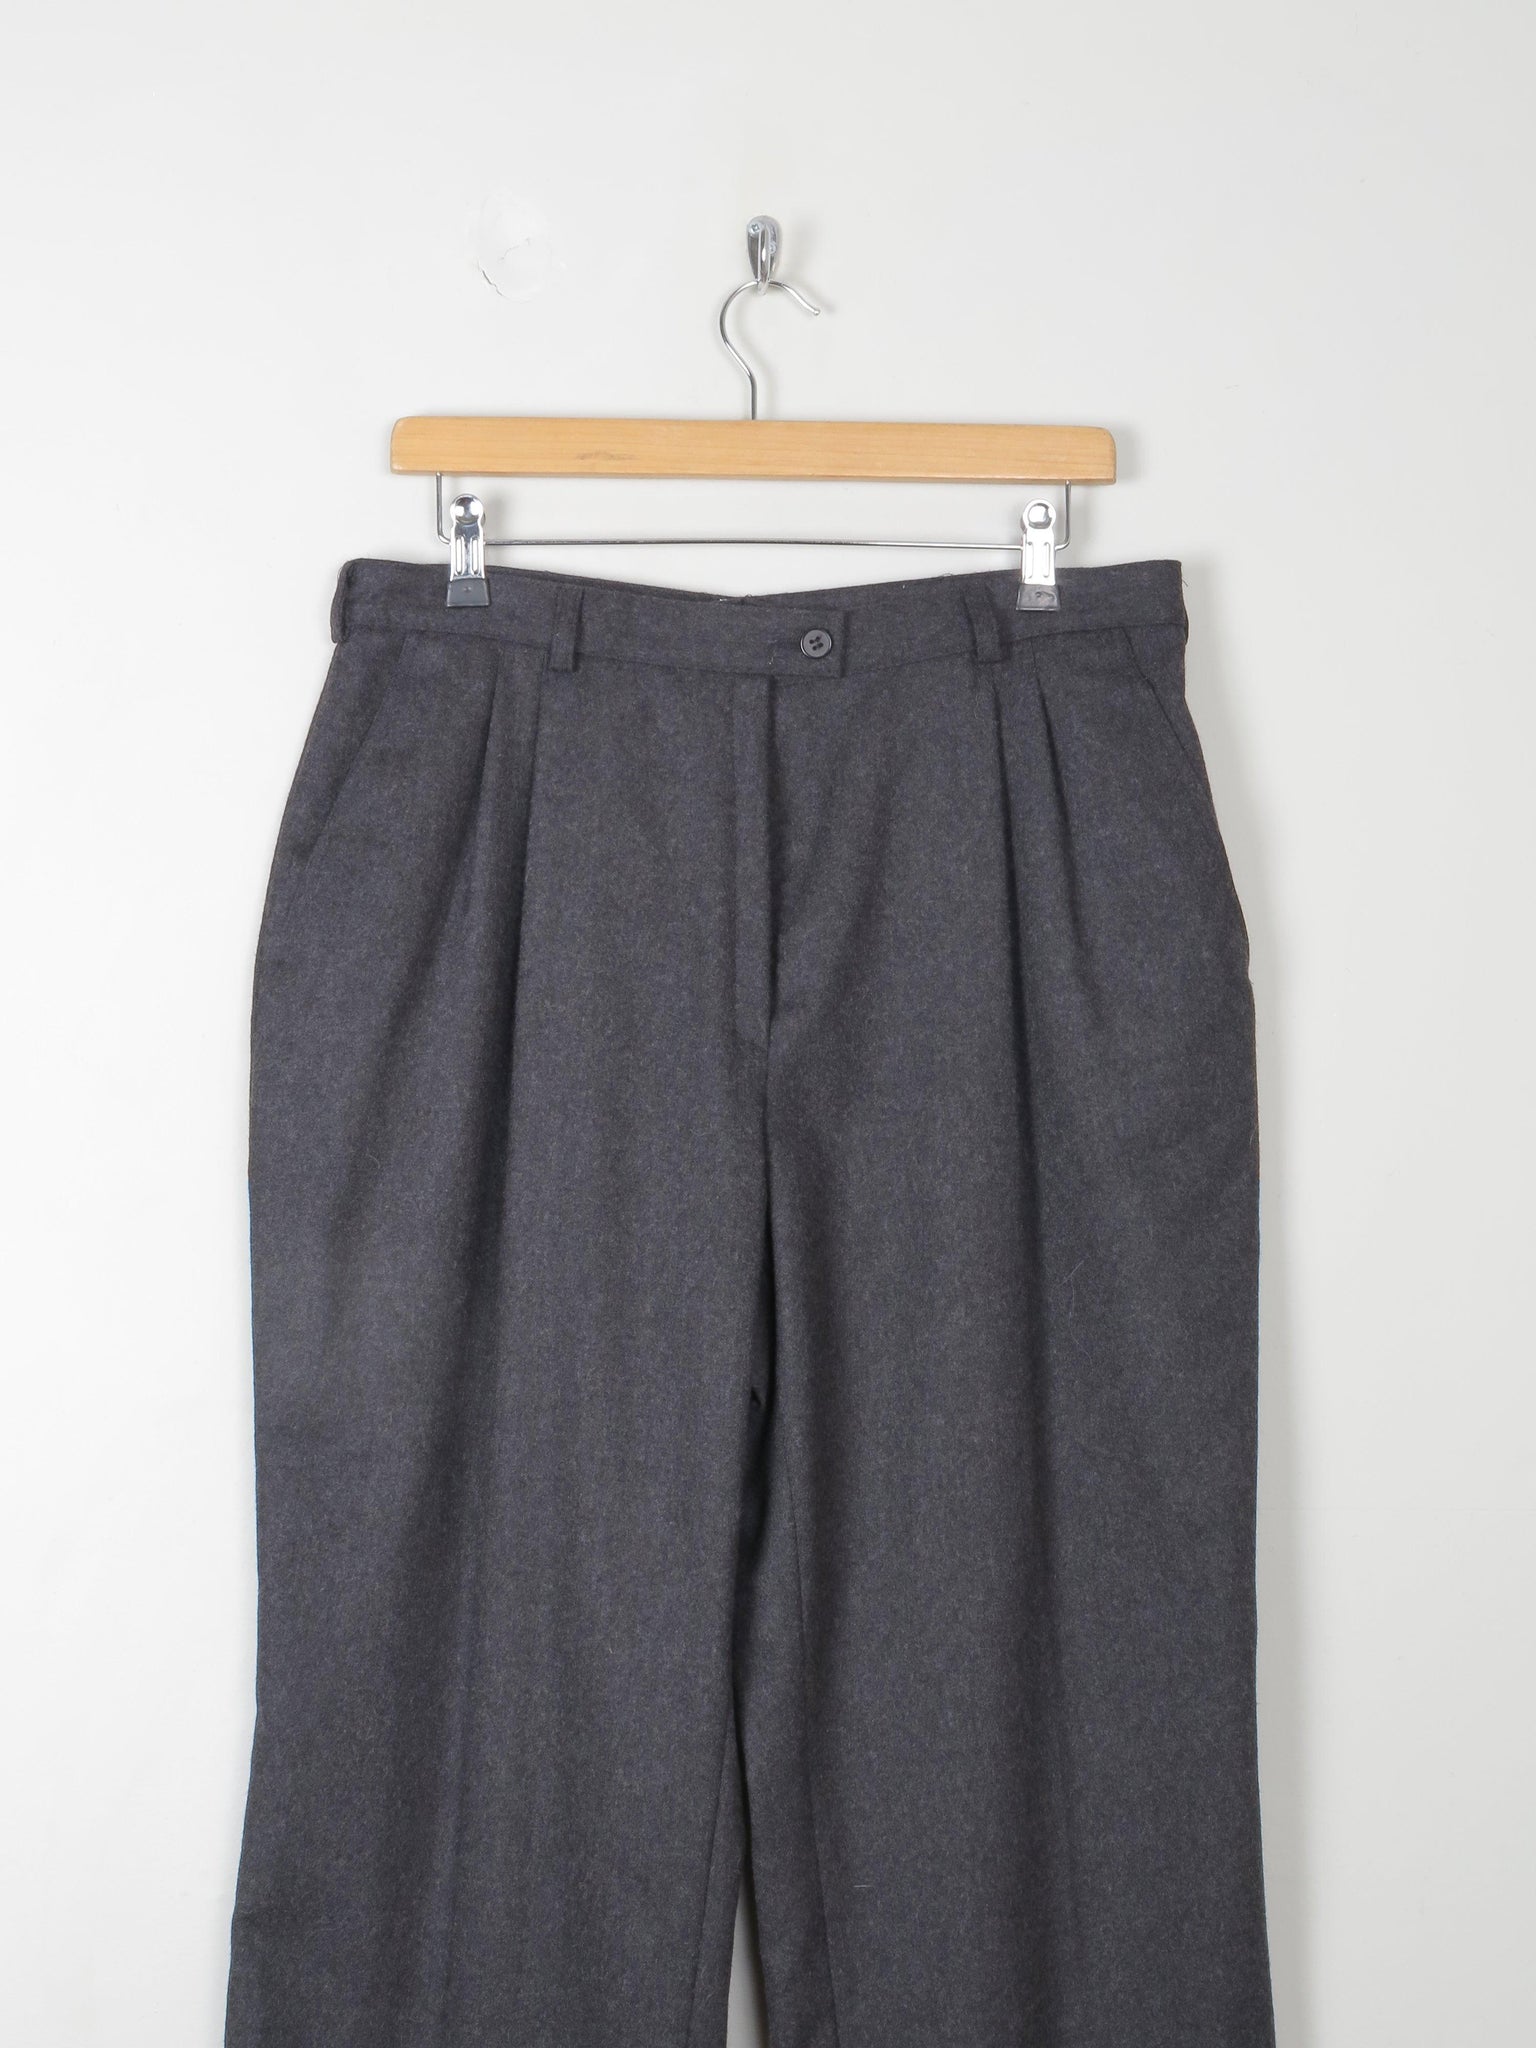 Women's Vintage Grey Wool Trousers L 33"/31L - The Harlequin